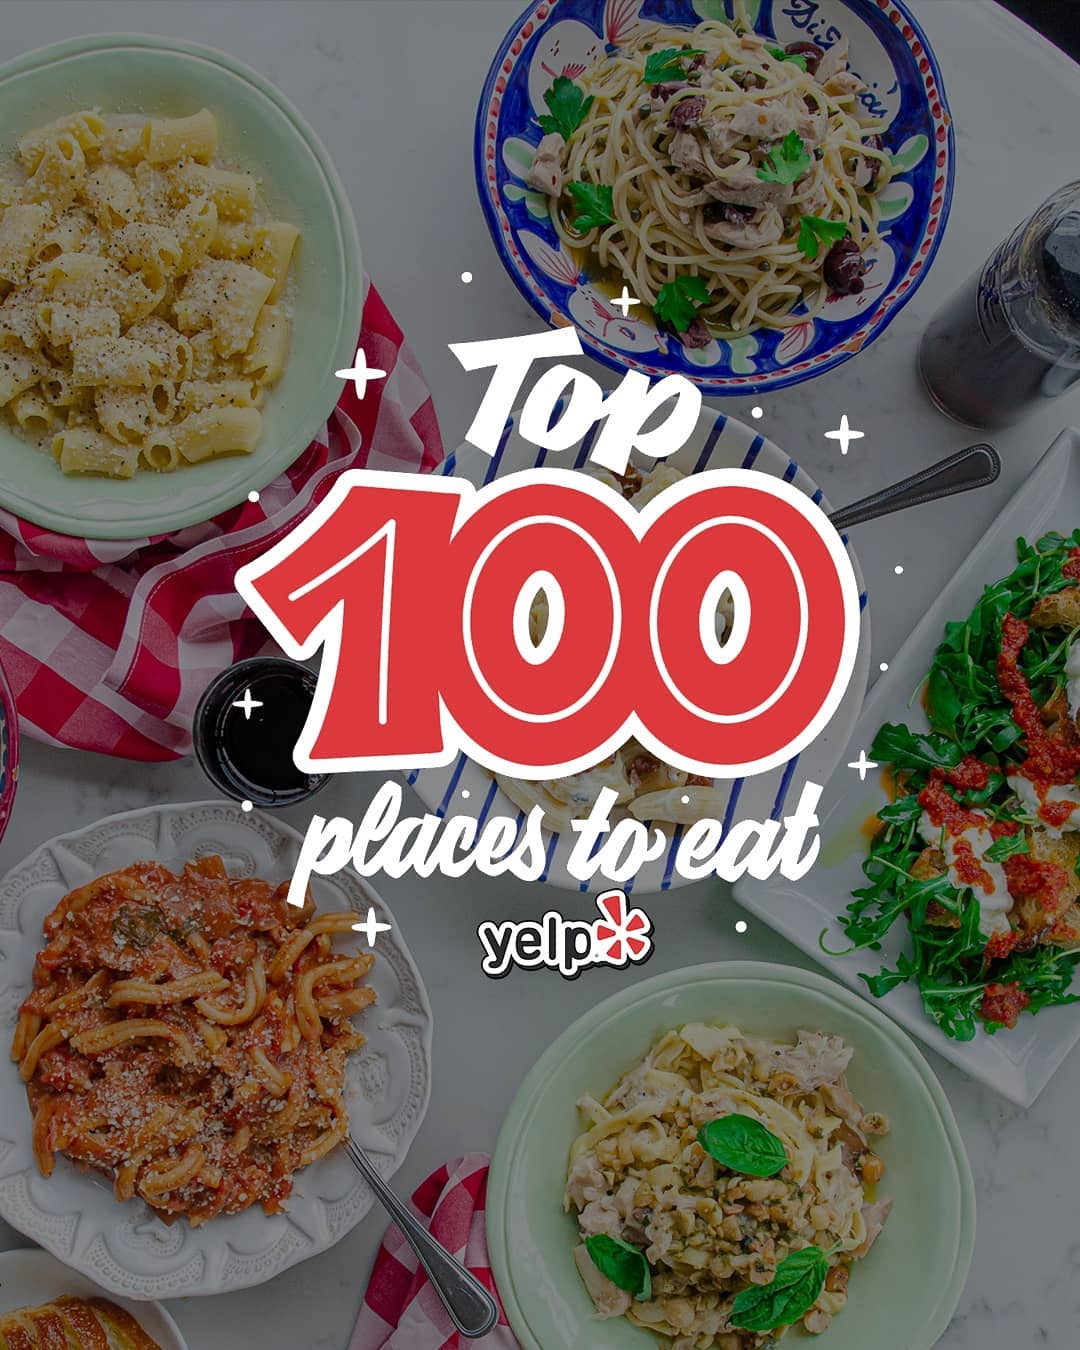 Top 100 places to Eat Yelp